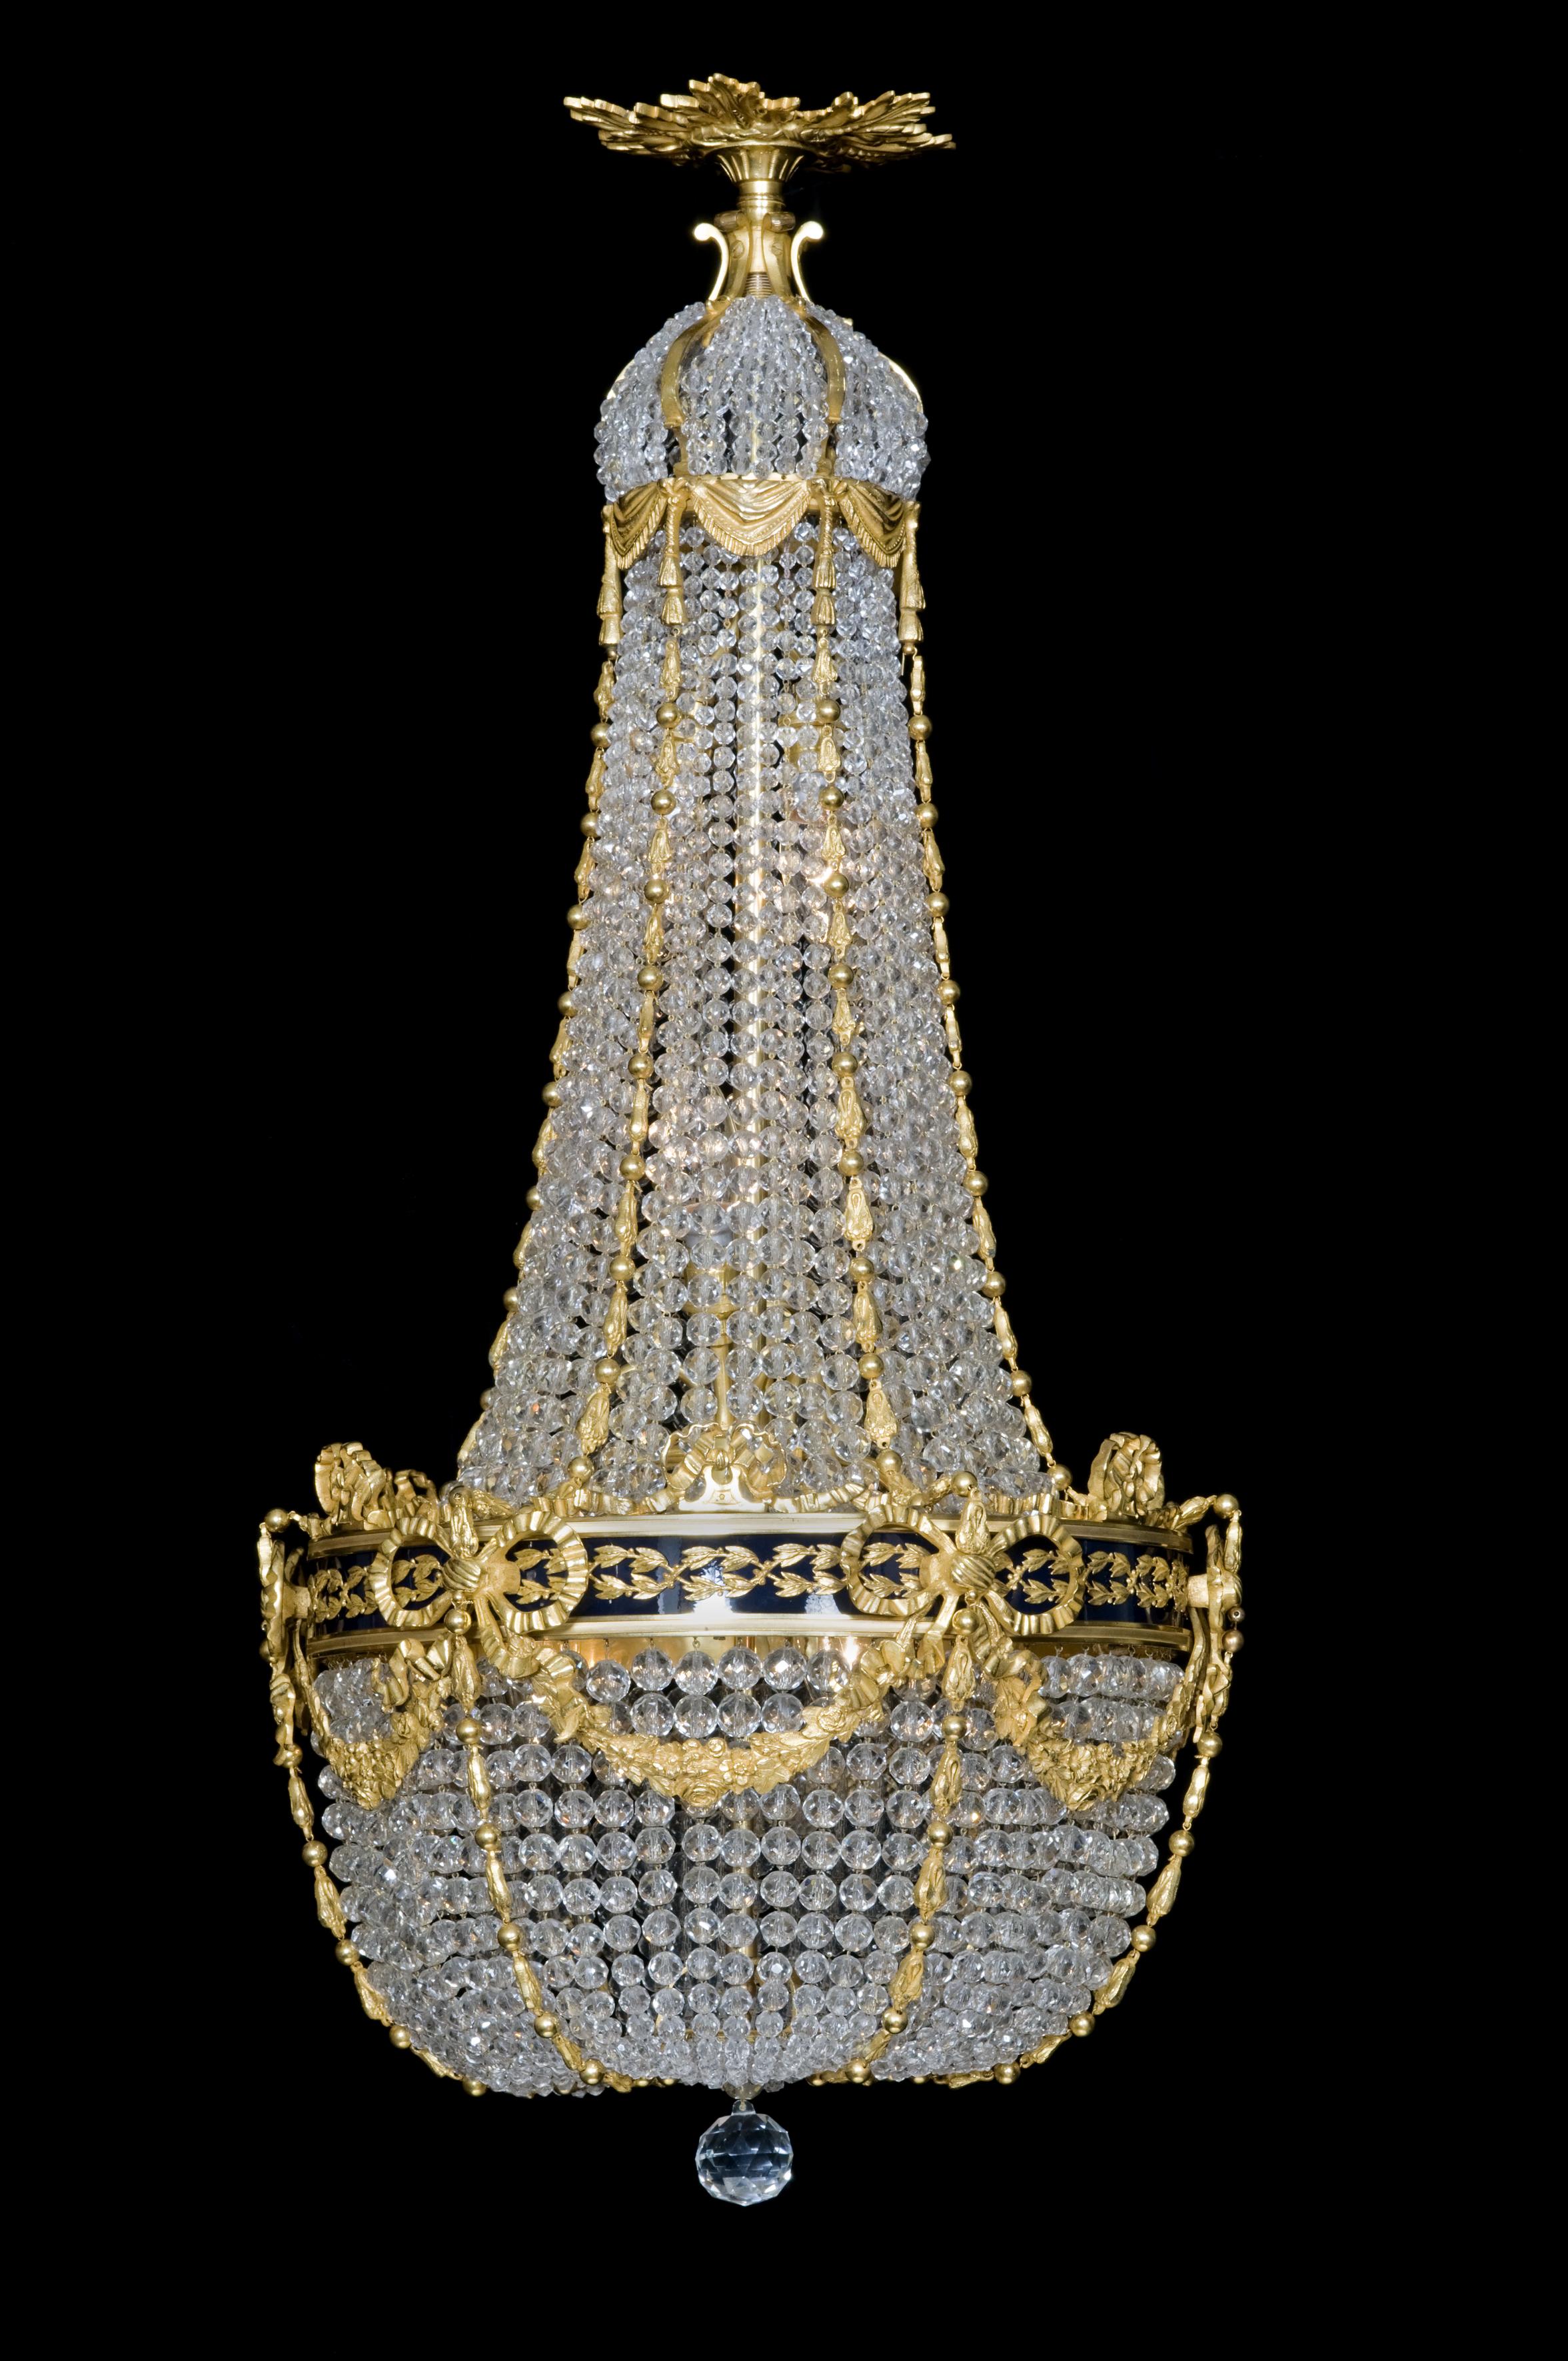 A fine gilt bronze and cut-crystal tent and bag chandelier with an enamel band.

French, circa 1880. 

This fine chandelier is of tent and bag form with wonderful gilt bronze cast foliate swags and bows and an unusual enameled central band.